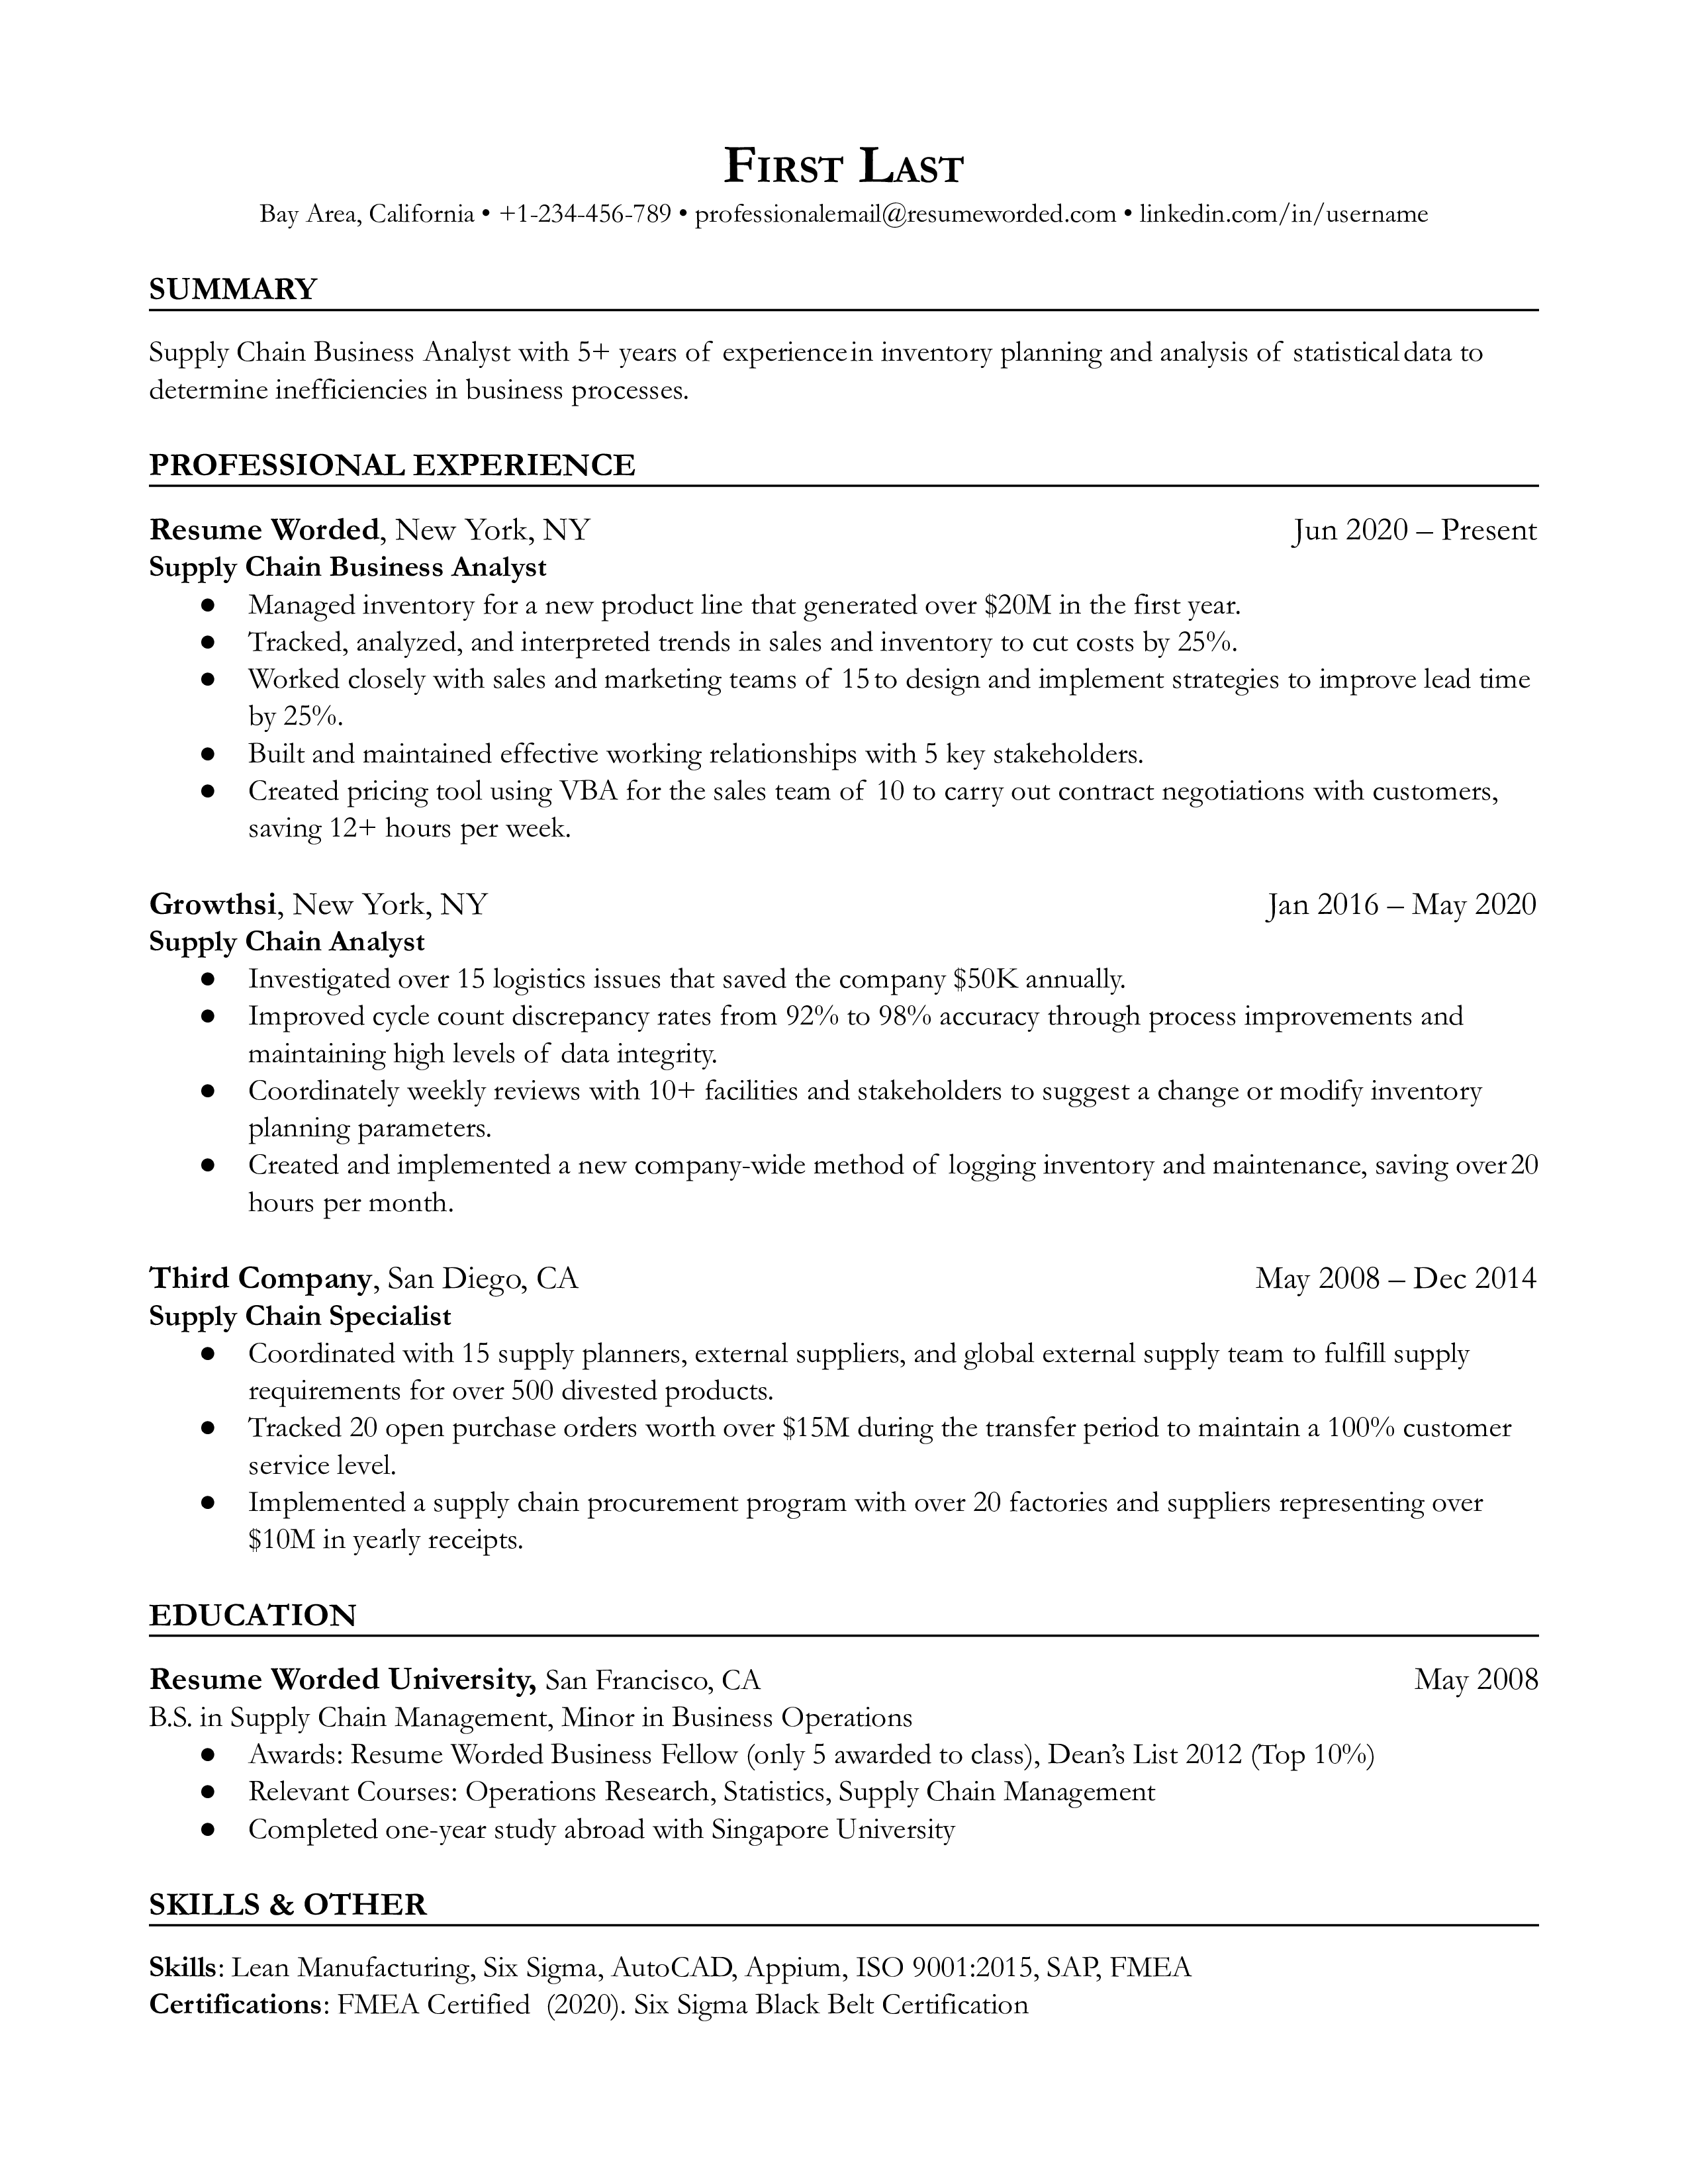 Supply Chain Business Analyst Resume Sample